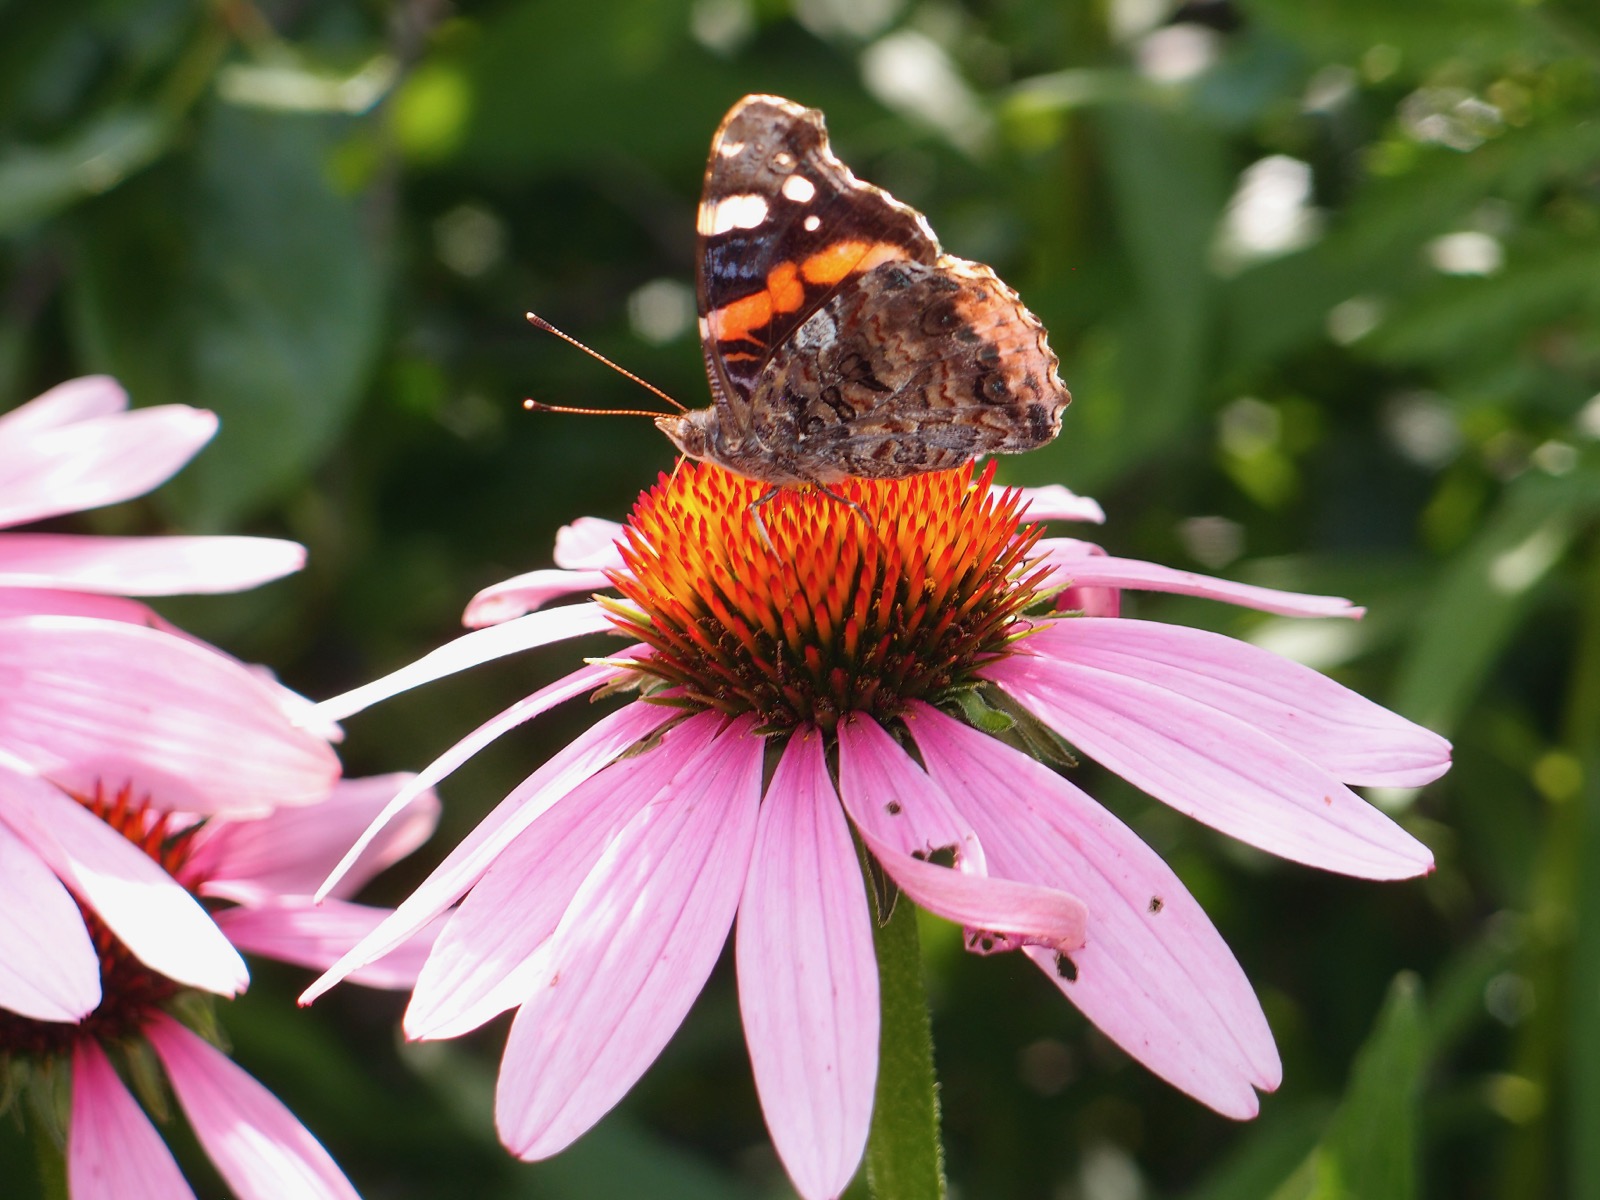 Closeup, not macro, photo of a medium sized butterfly perched on a flower